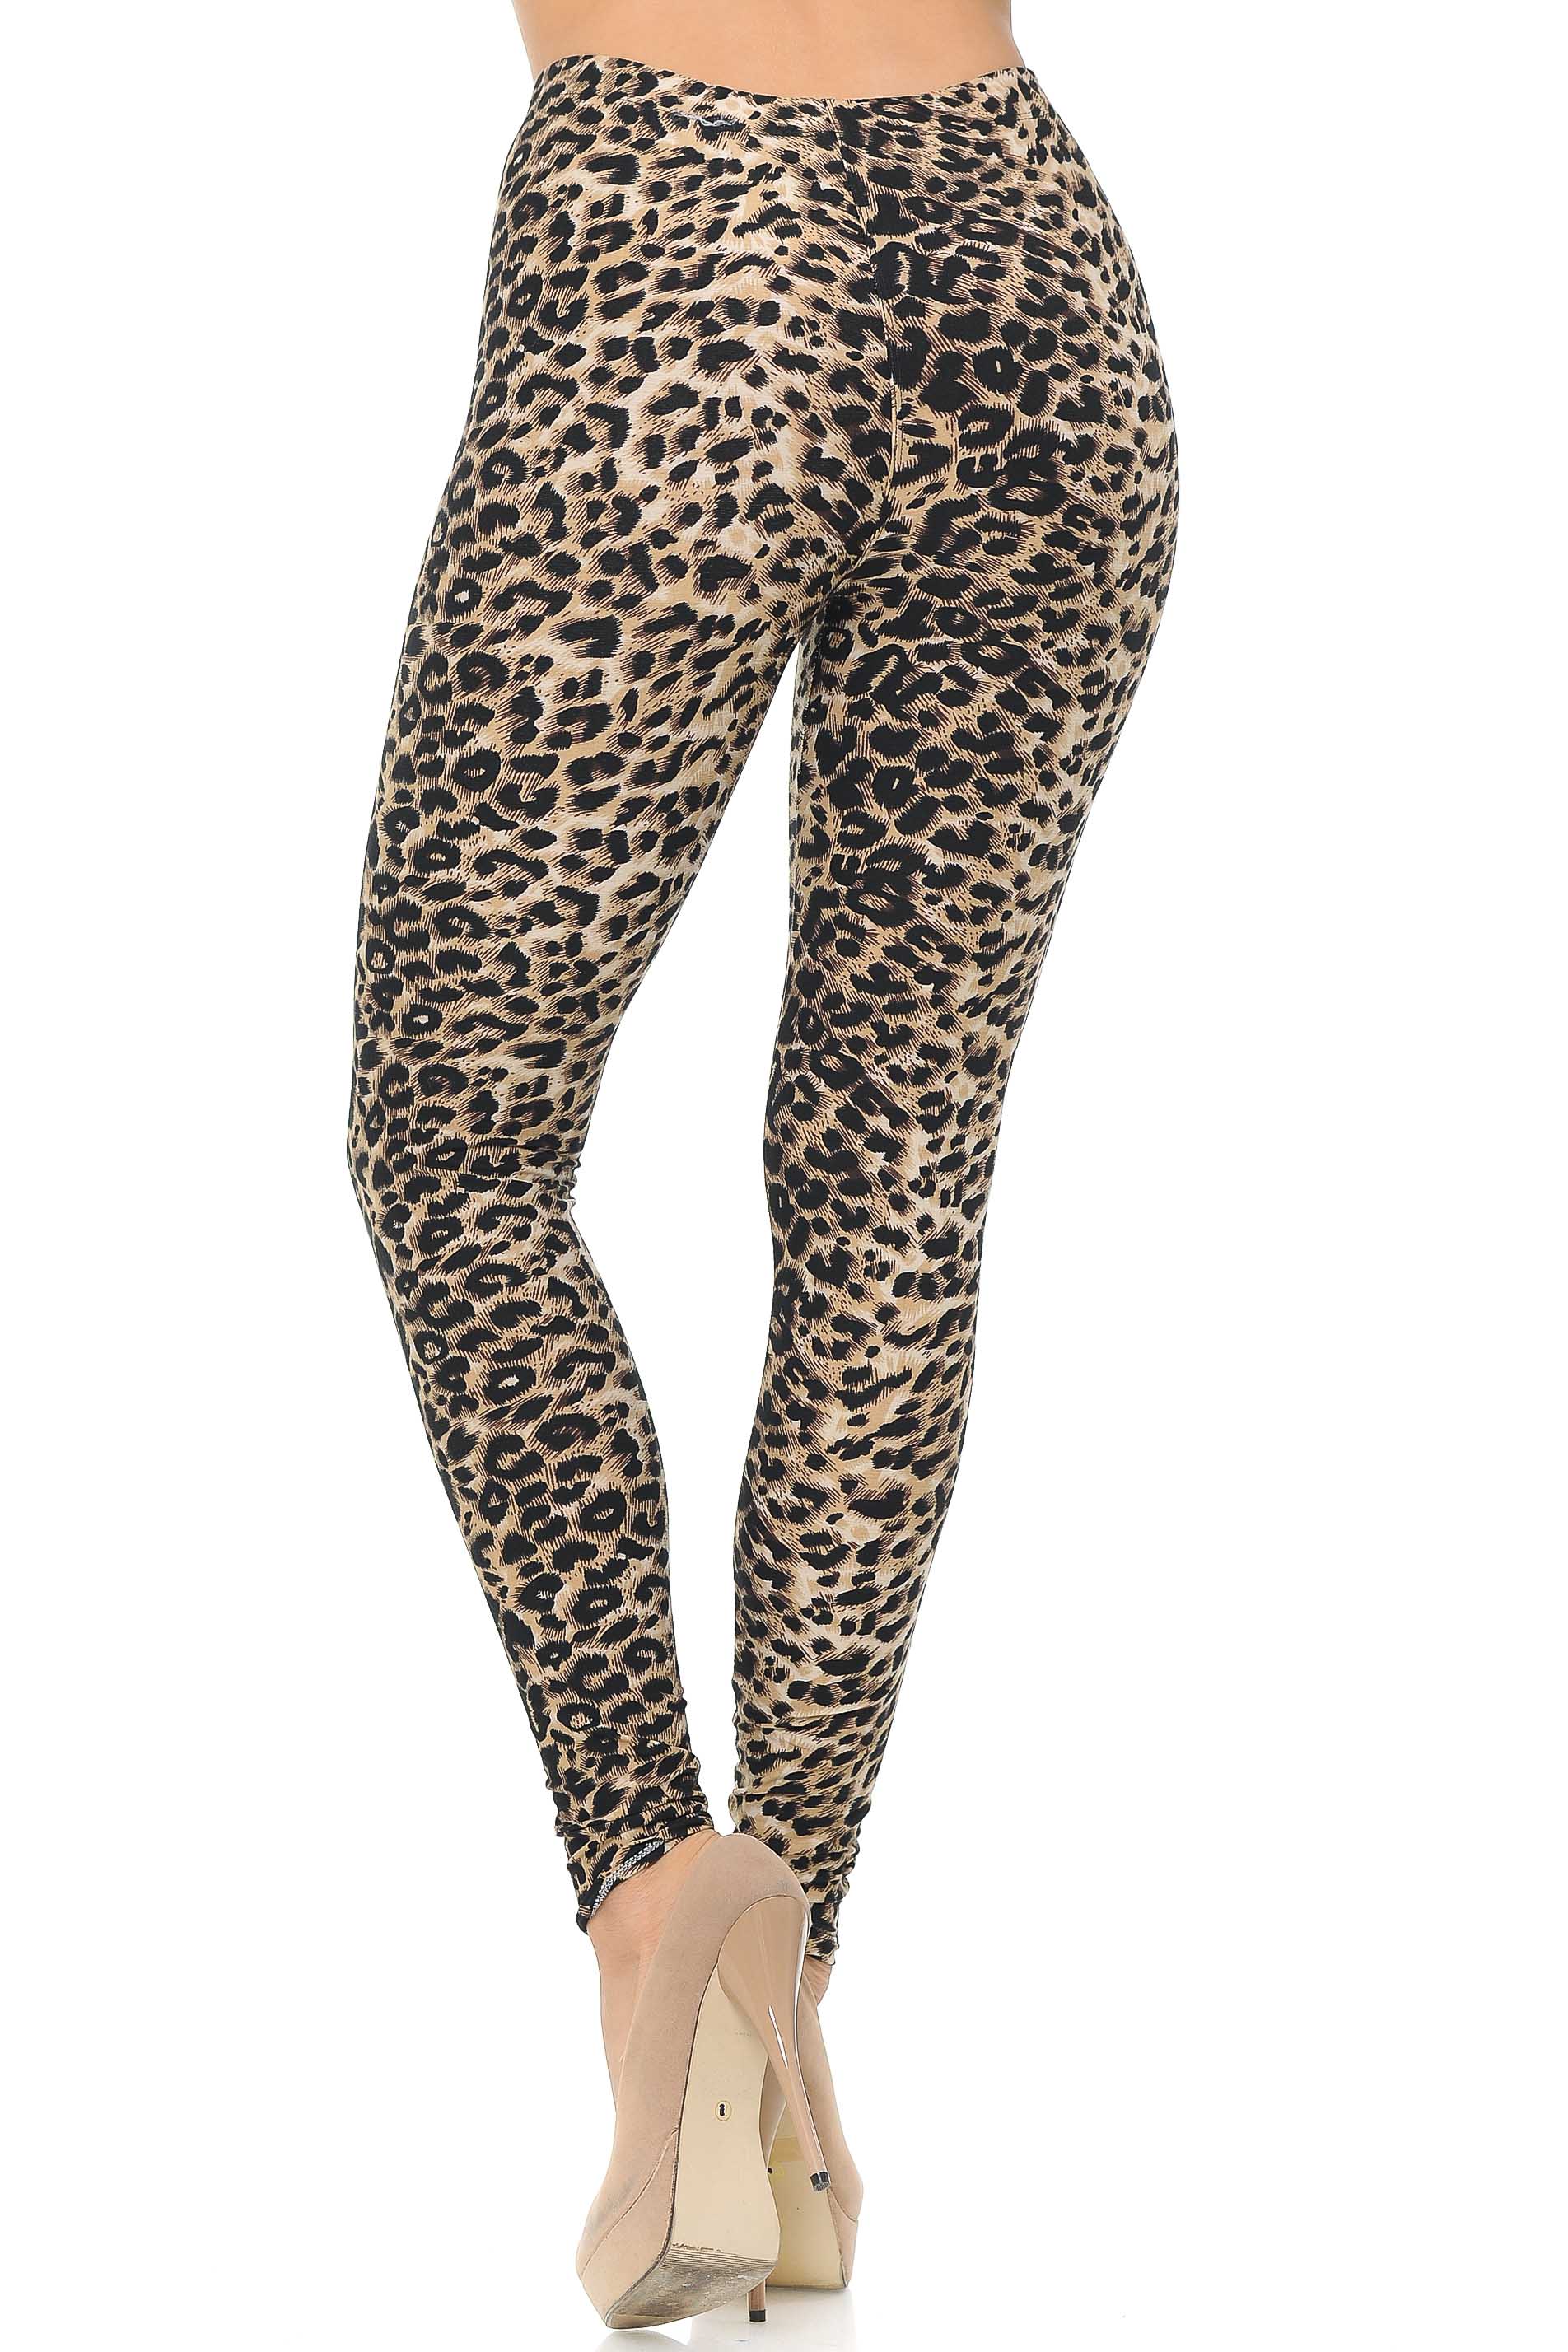 Wholesale Buttery Smooth Feral Cheetah Leggings